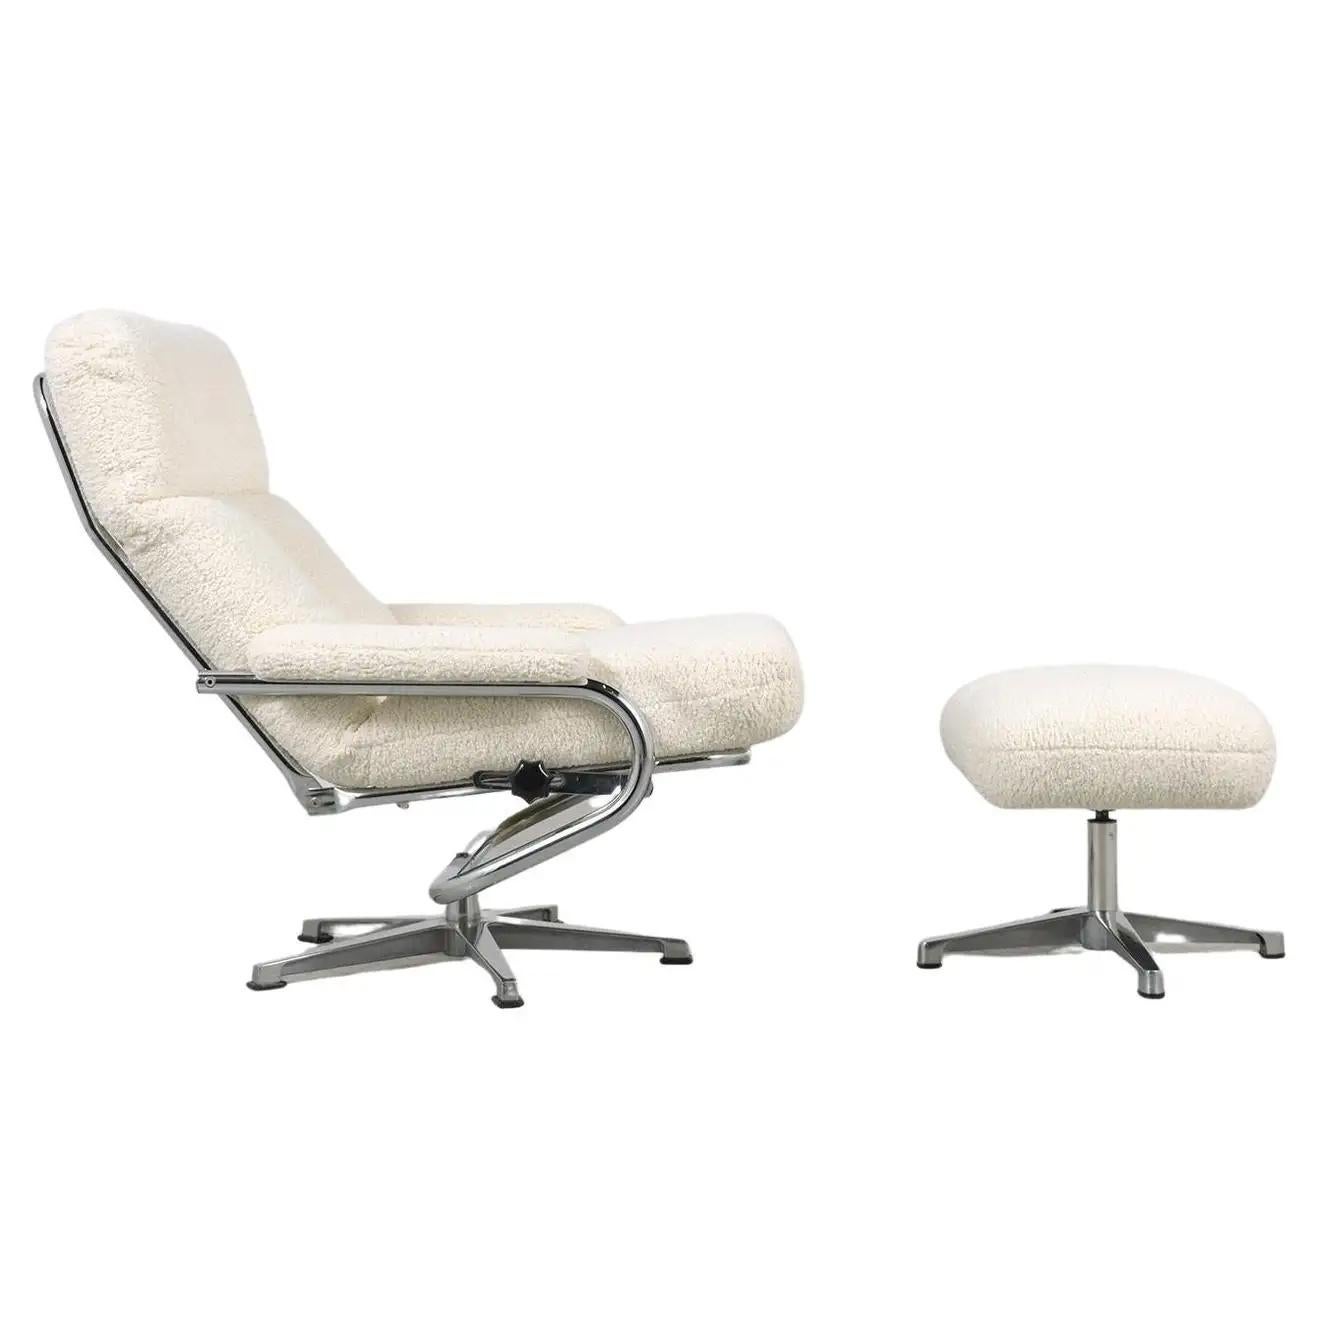 Step into the stylish world of mid-century modern design with our Chrome-Plated Recliner Chair and Ottoman set, a testament to the iconic 1970s aesthetics blended seamlessly with contemporary comfort. Crafted from tubular steel, this duo stands out